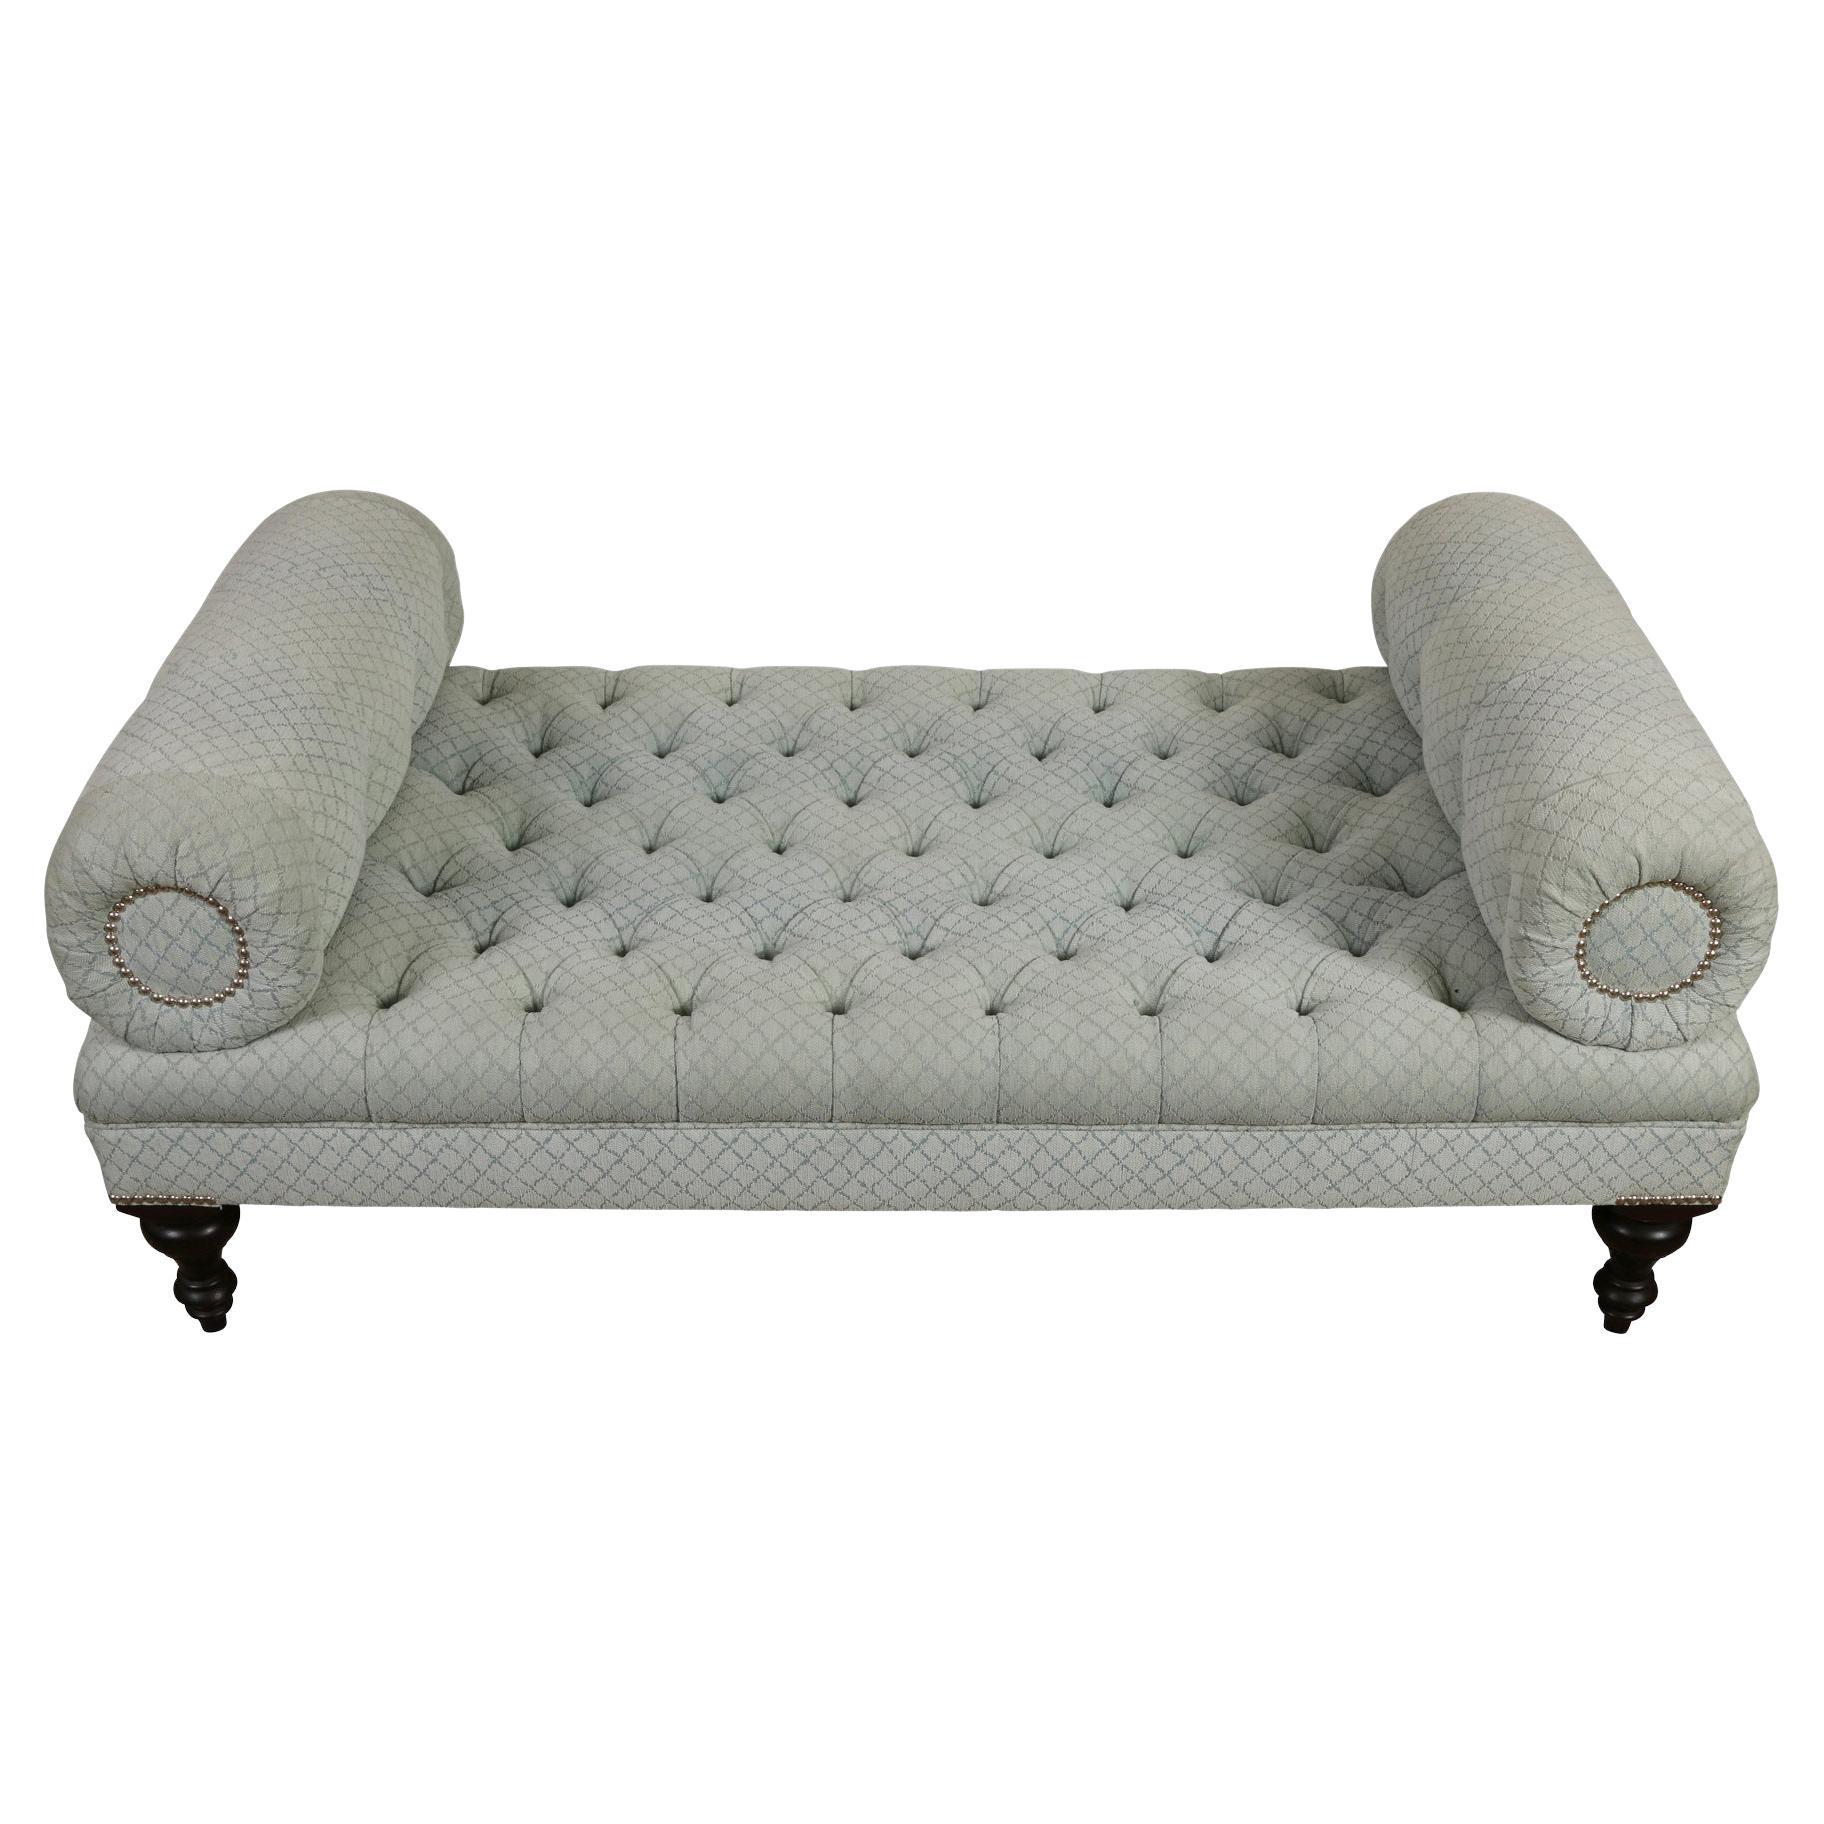 George Smith Tufted Bench with Turned Legs For Sale